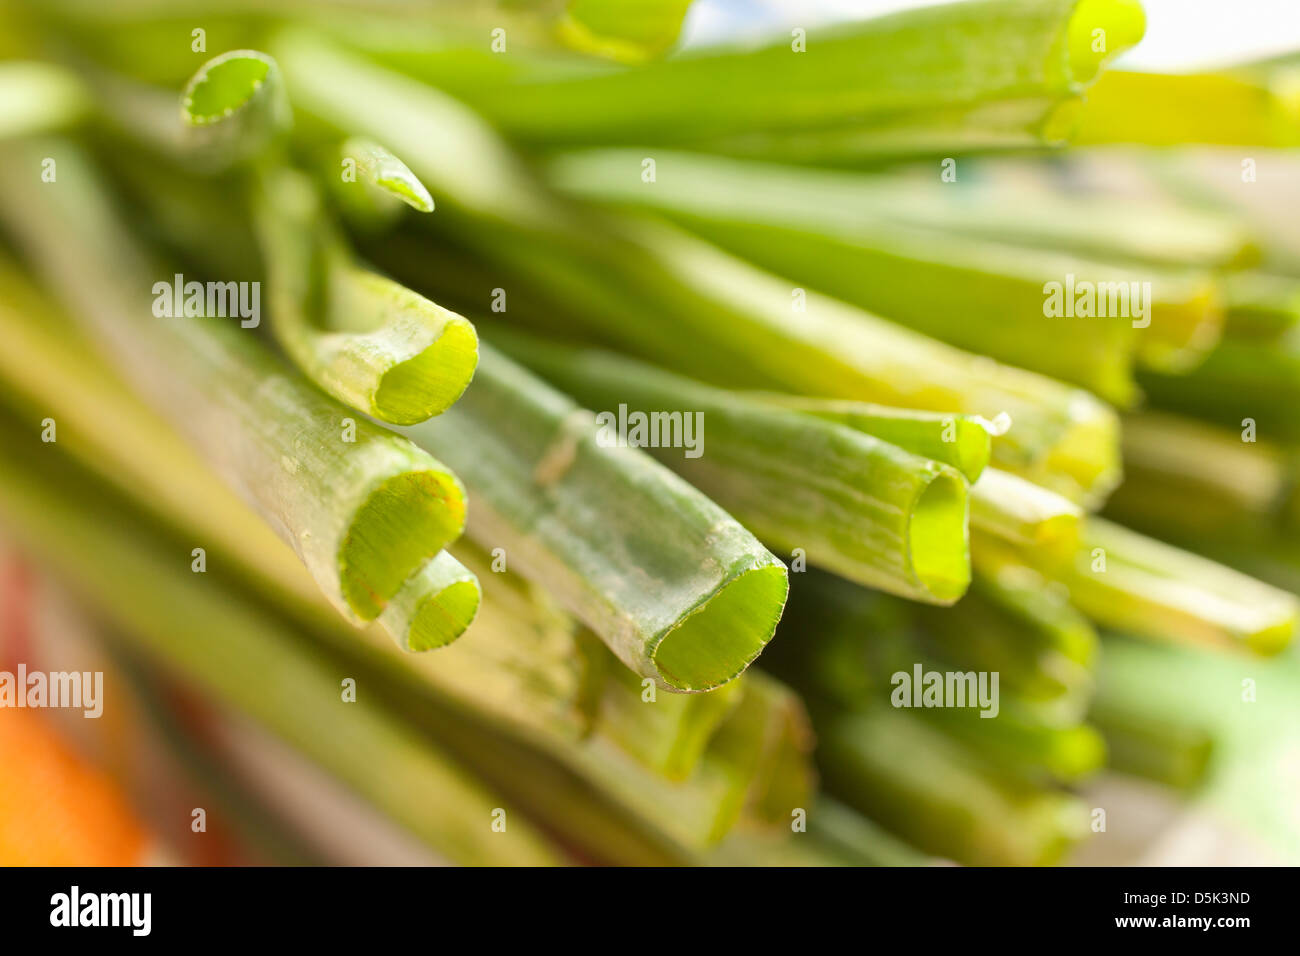 Bunches of Scallions, sometimes called long or green onions Stock Photo